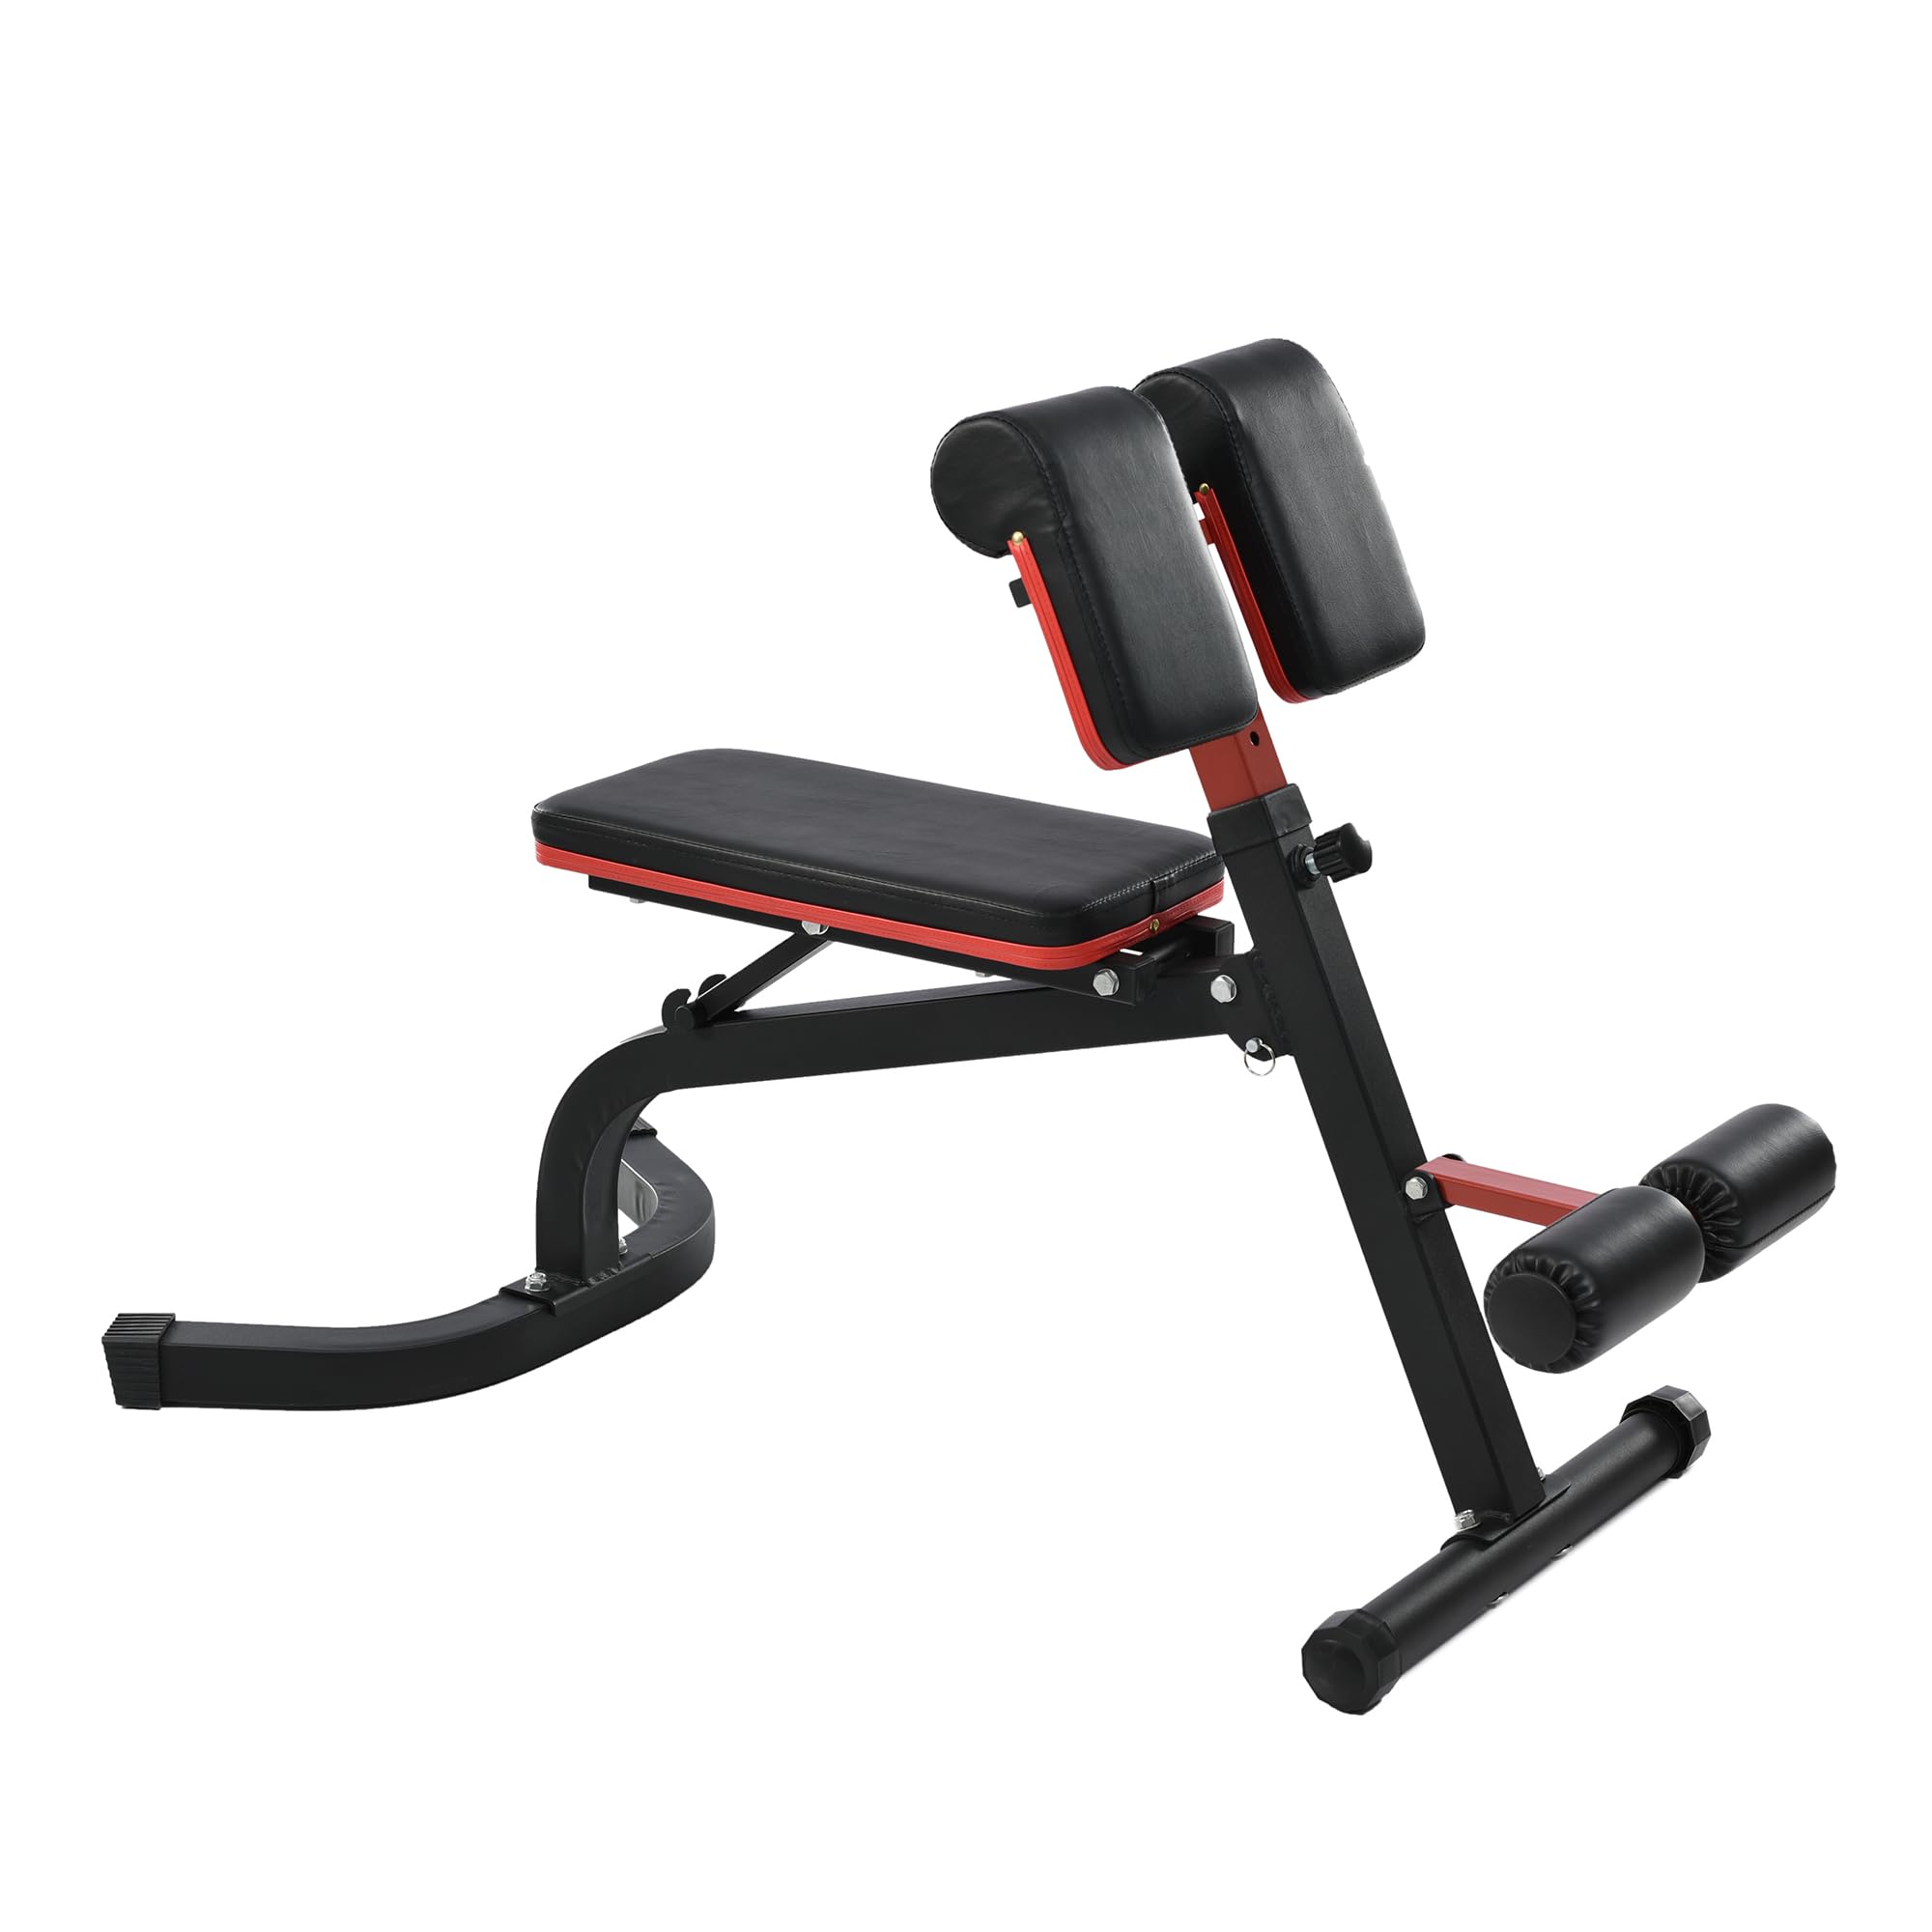 Yehha Roman Chair Back Extension Multi Functional Ab Full All-in-One Body Workout Buttocks Machine Incline Decline Home F